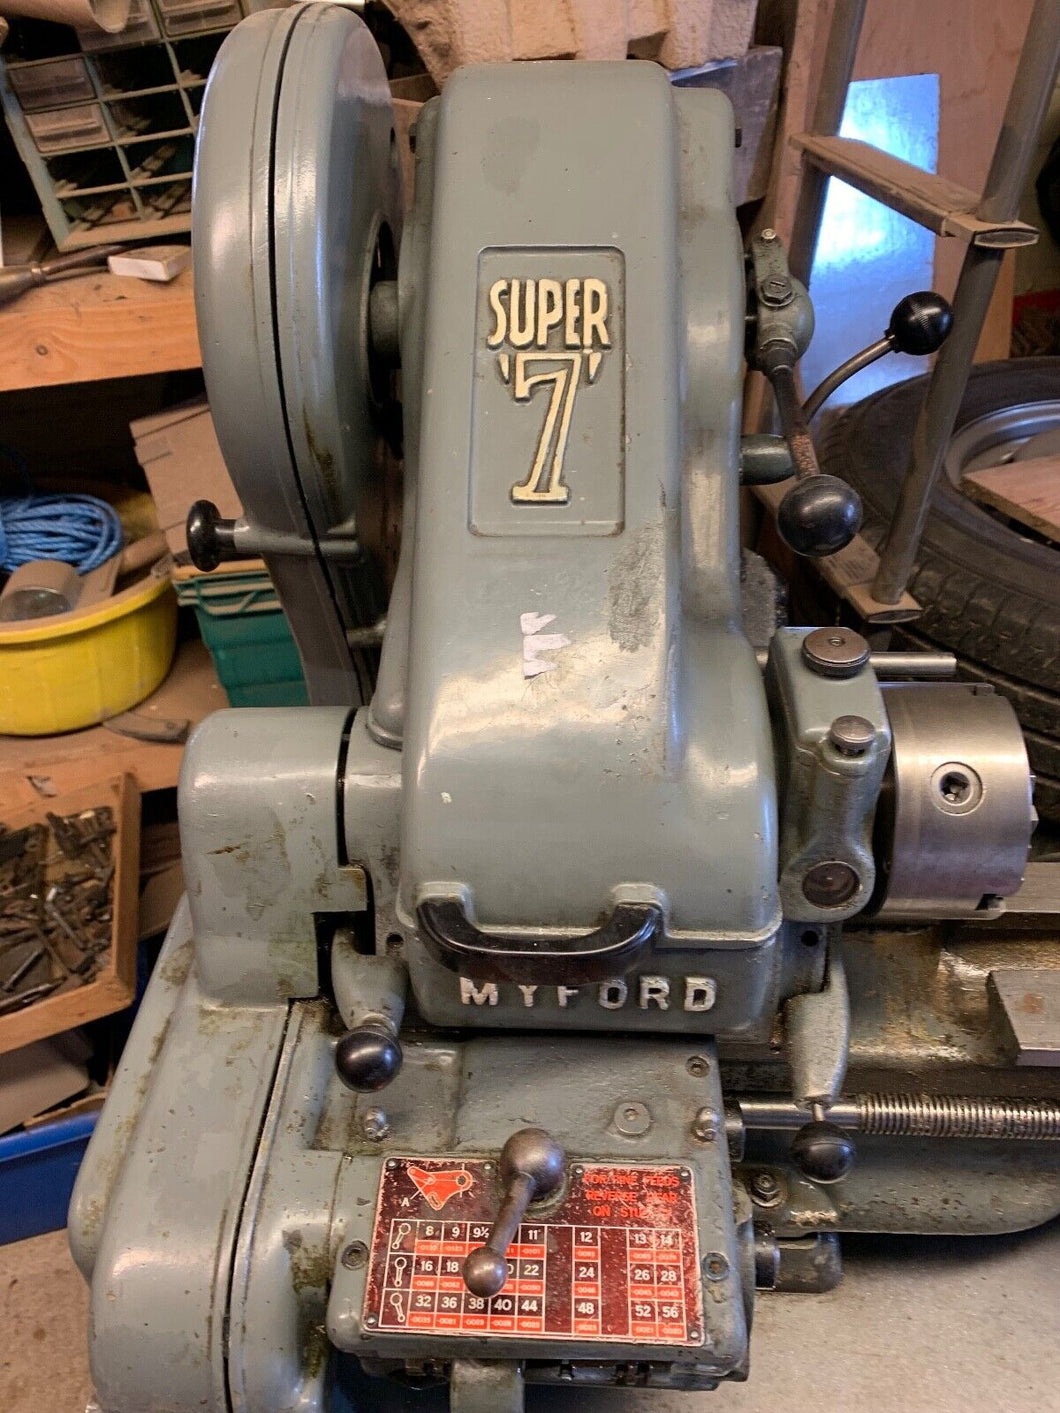 MYFORD SUPER 7 LATHE. ANY TRIAL WELCOME. LOTS EXTRAS - Boyshill Tools and Treen